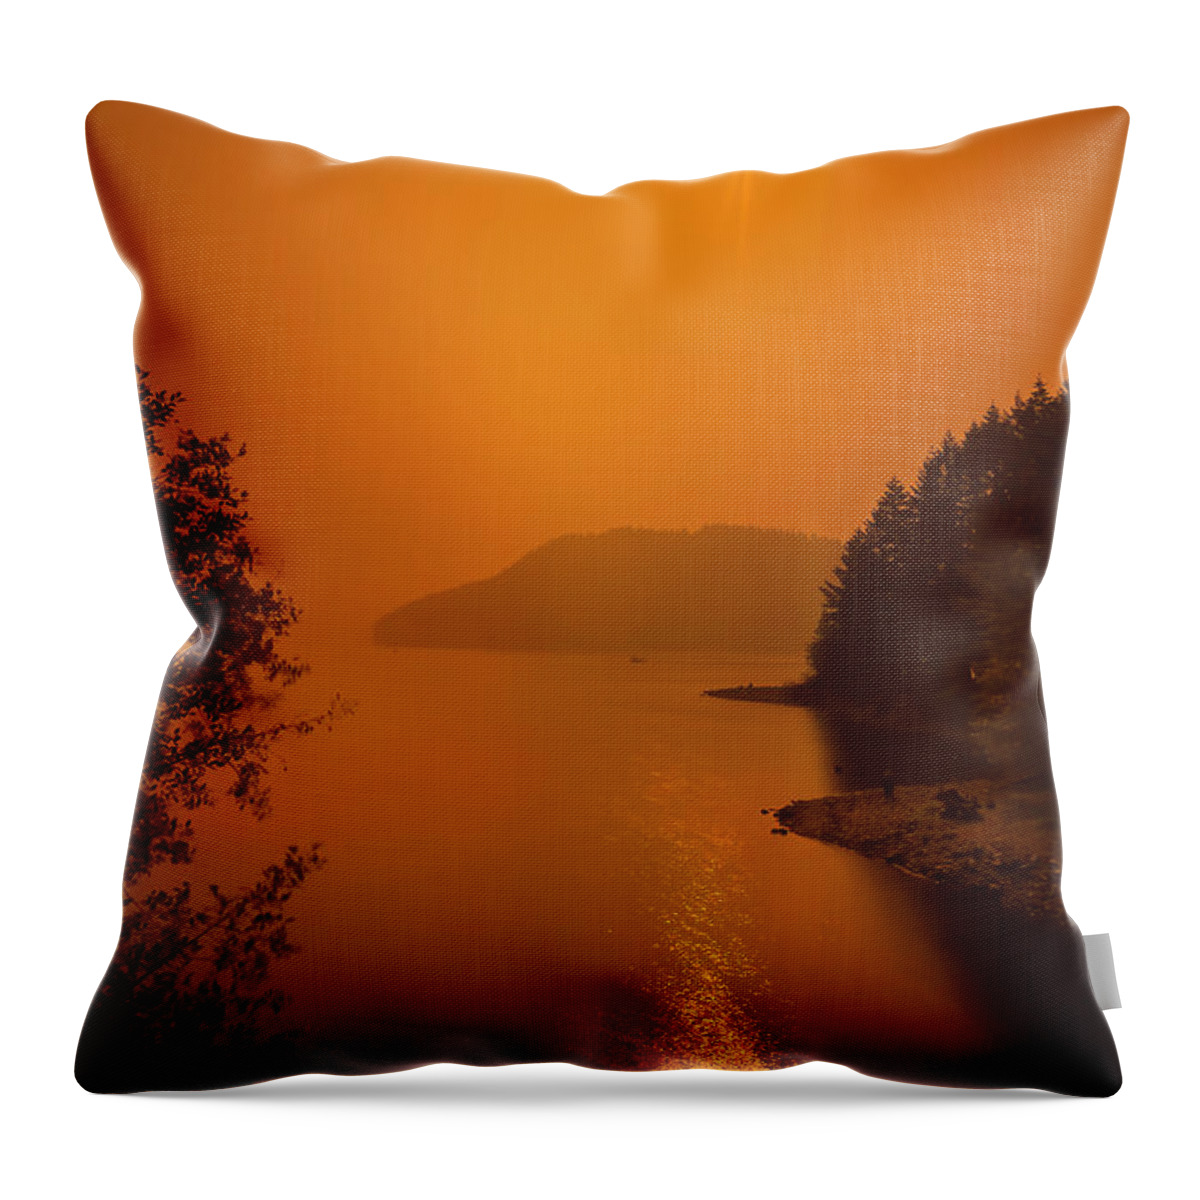 Solar Eclipse Throw Pillow featuring the photograph Preclipse 8.17 by Dan McGeorge